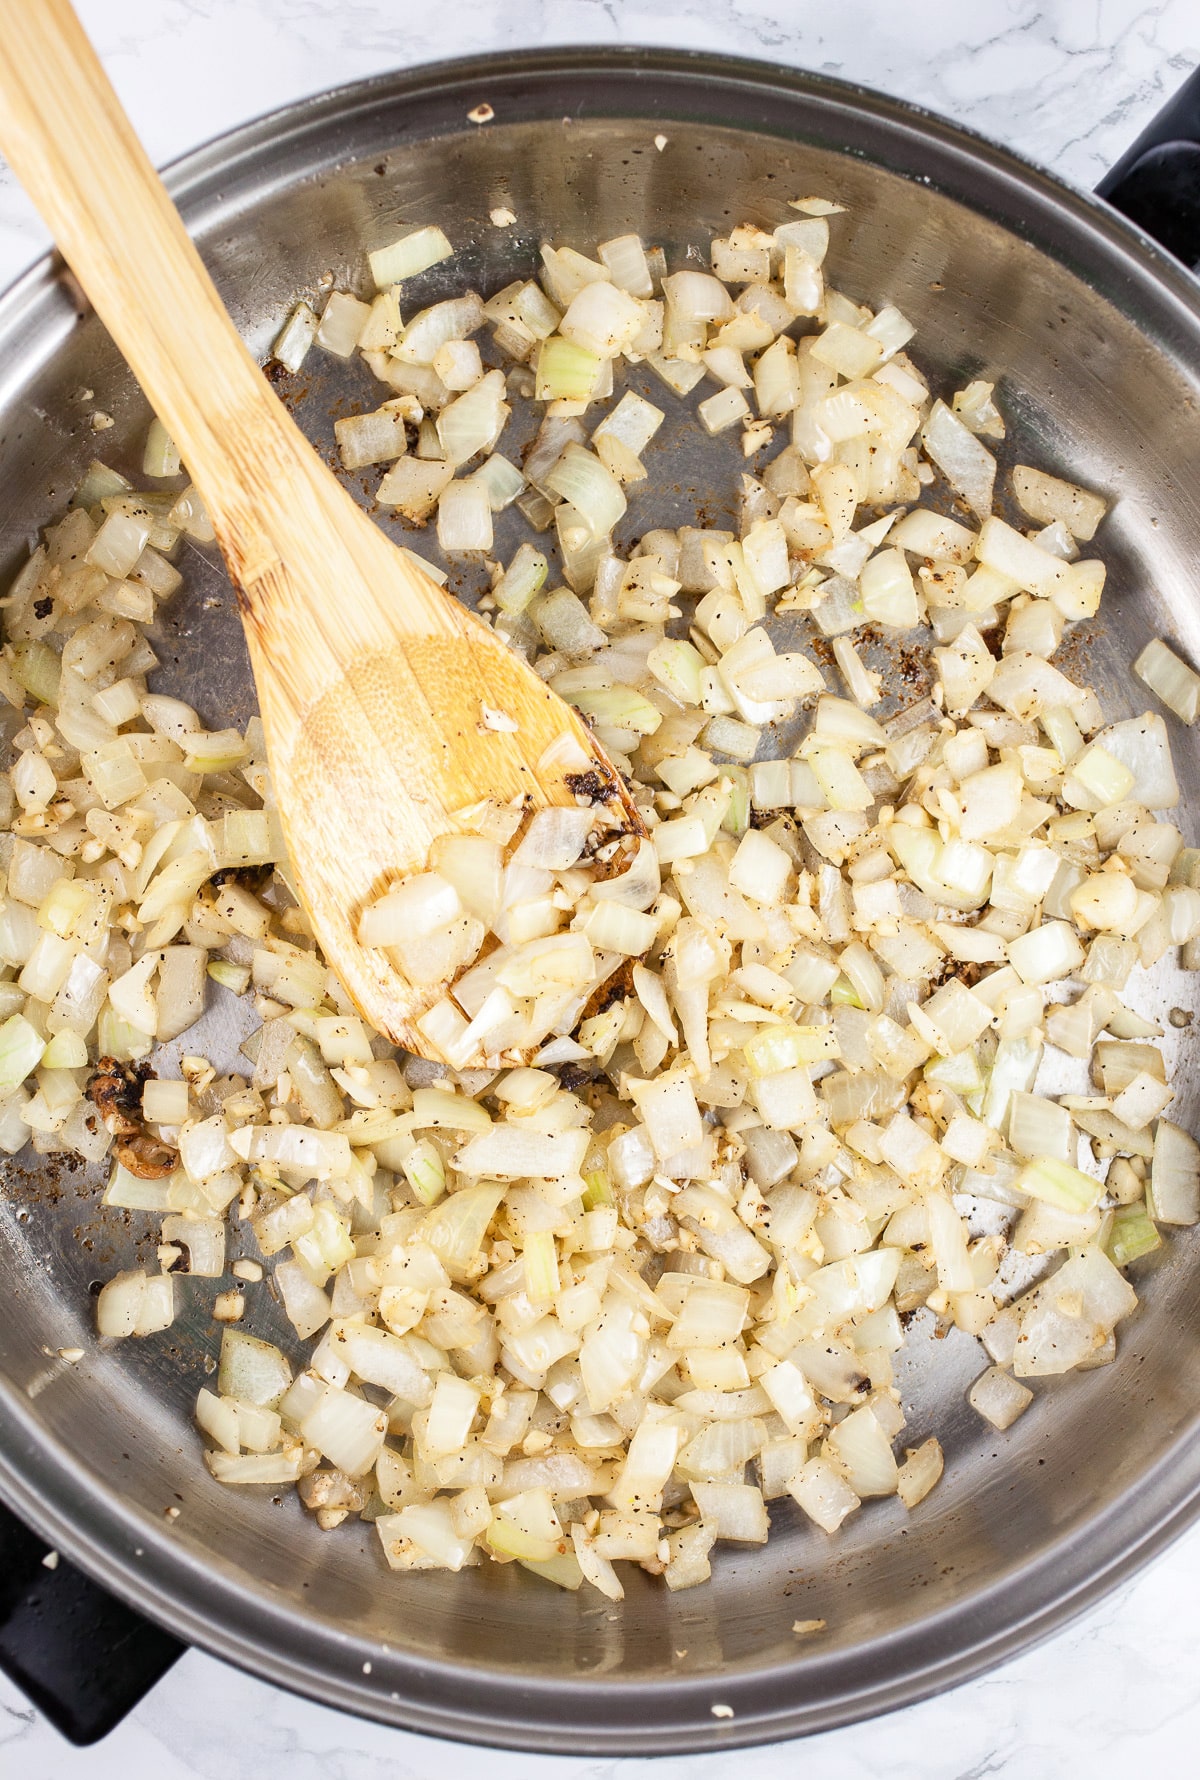 Minced garlic and onions sautéed in skillet with wooden spoon. 